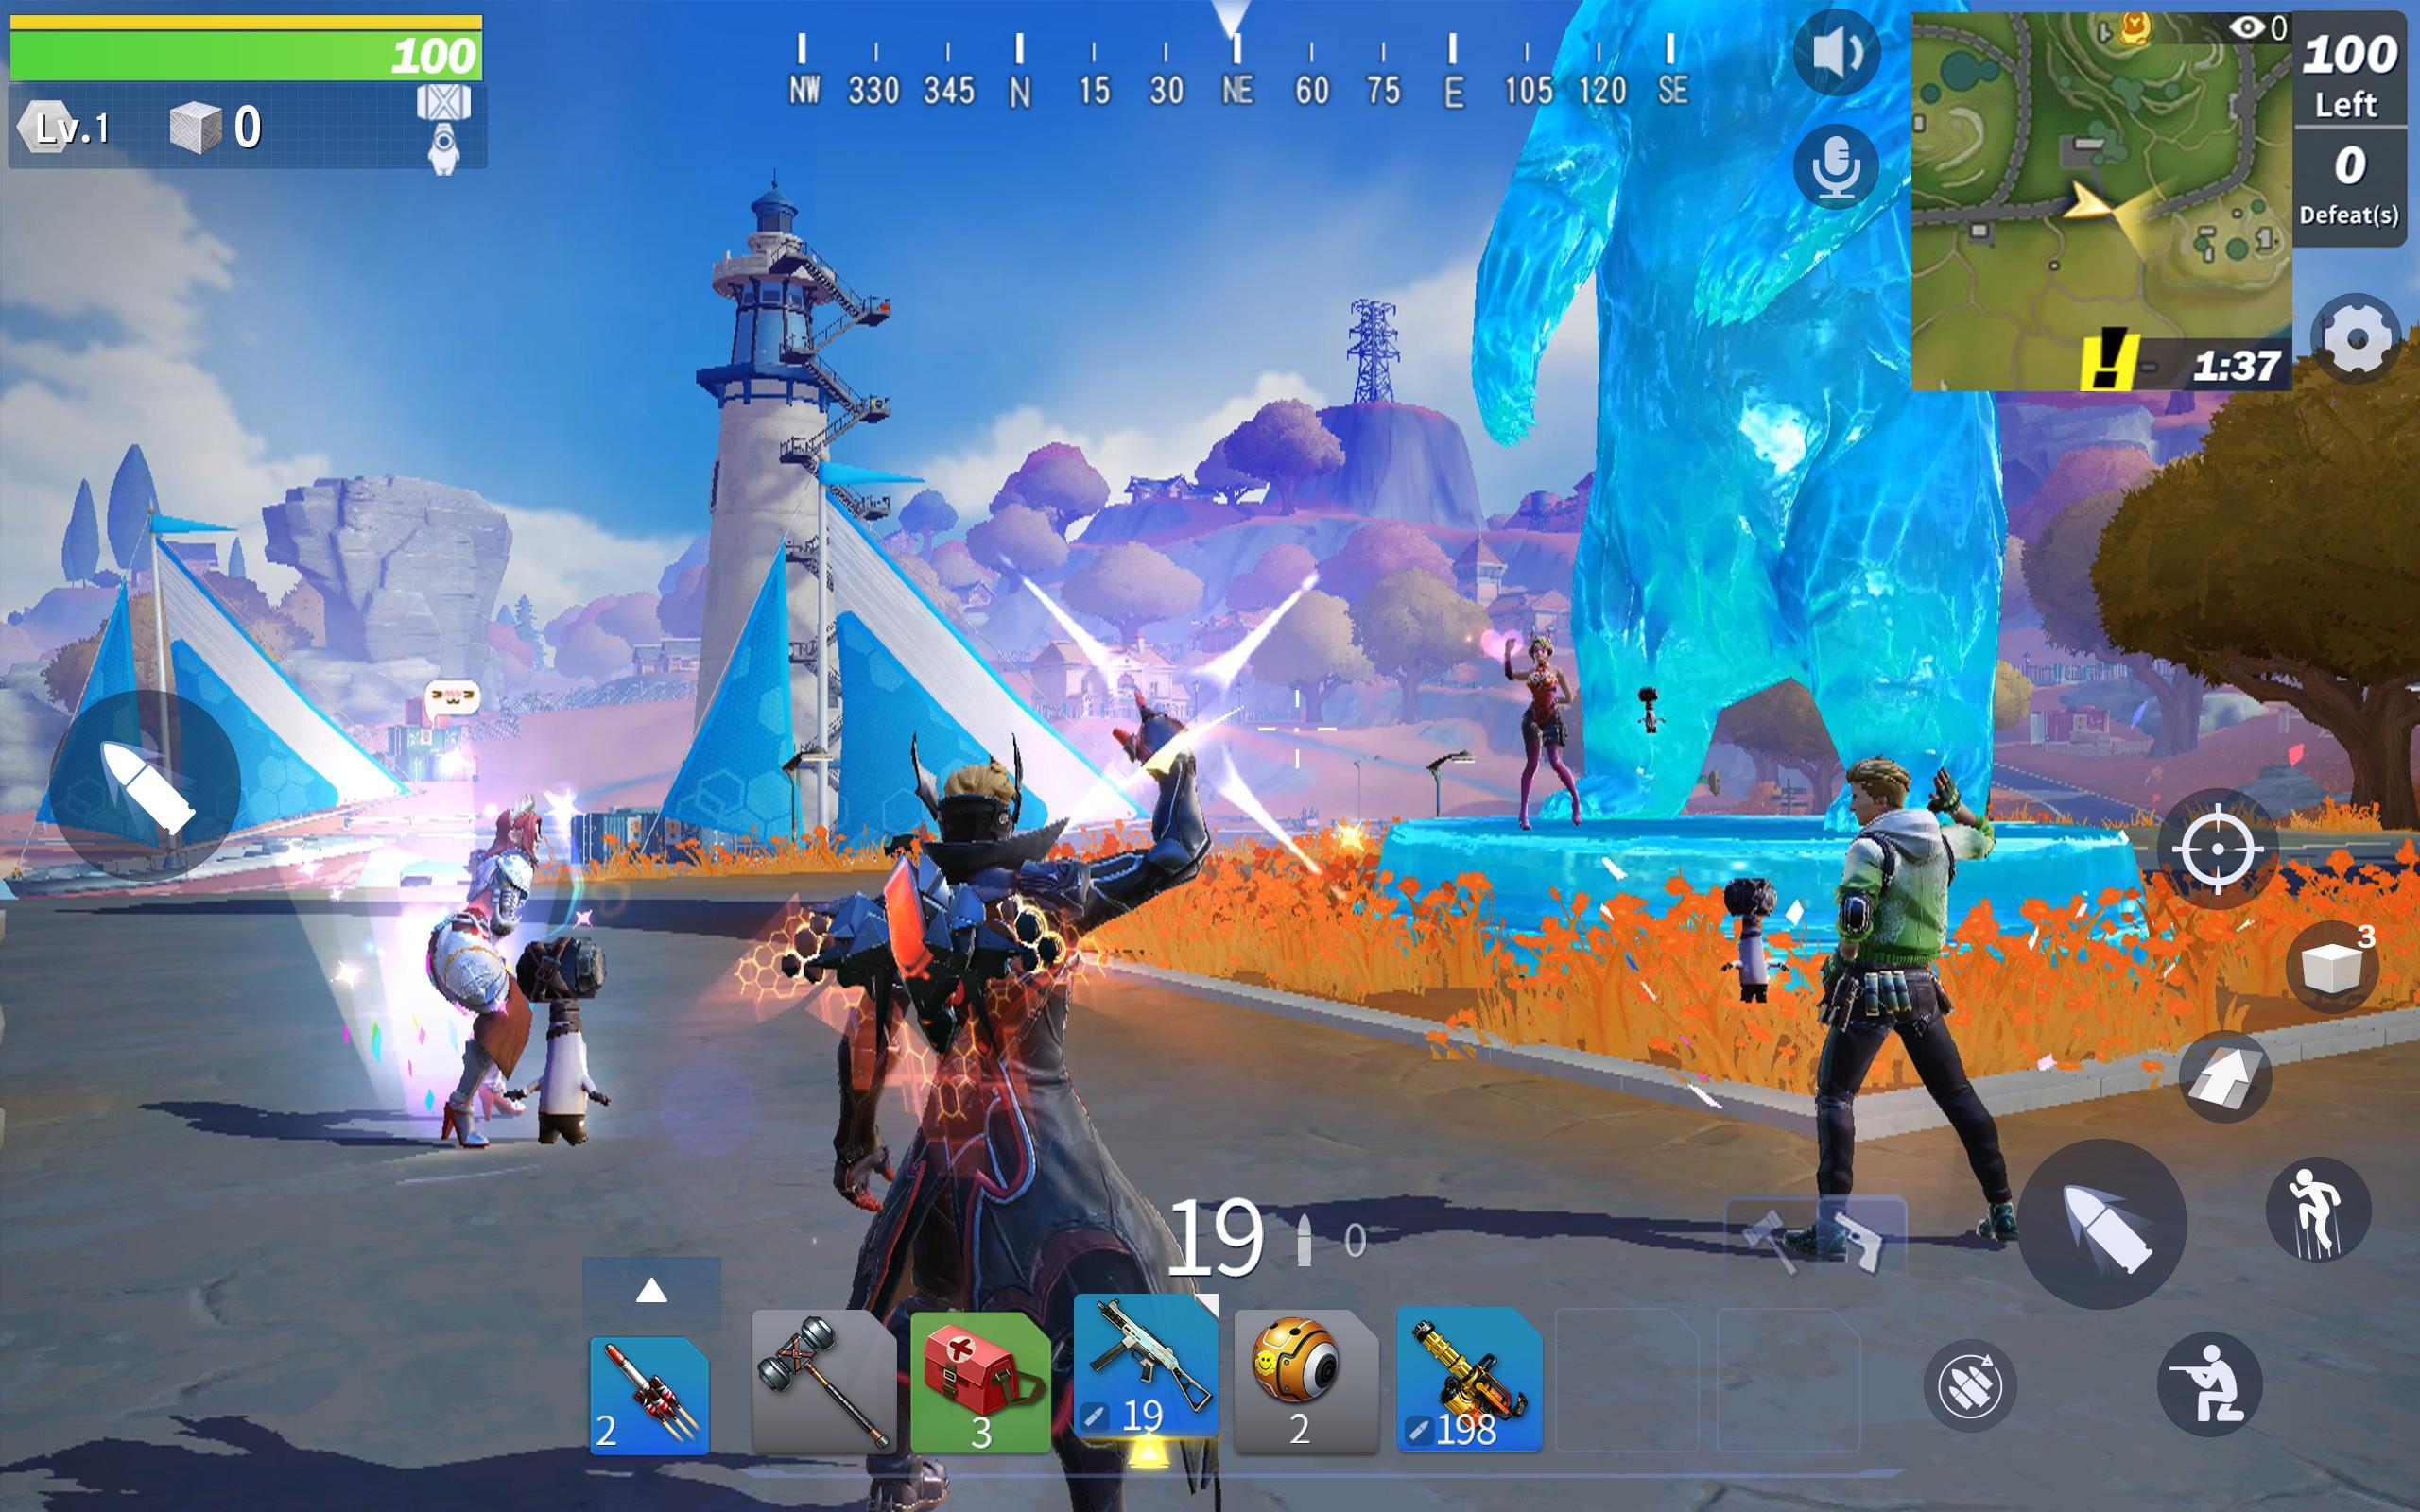 Creative Destruction for Android - APK Download